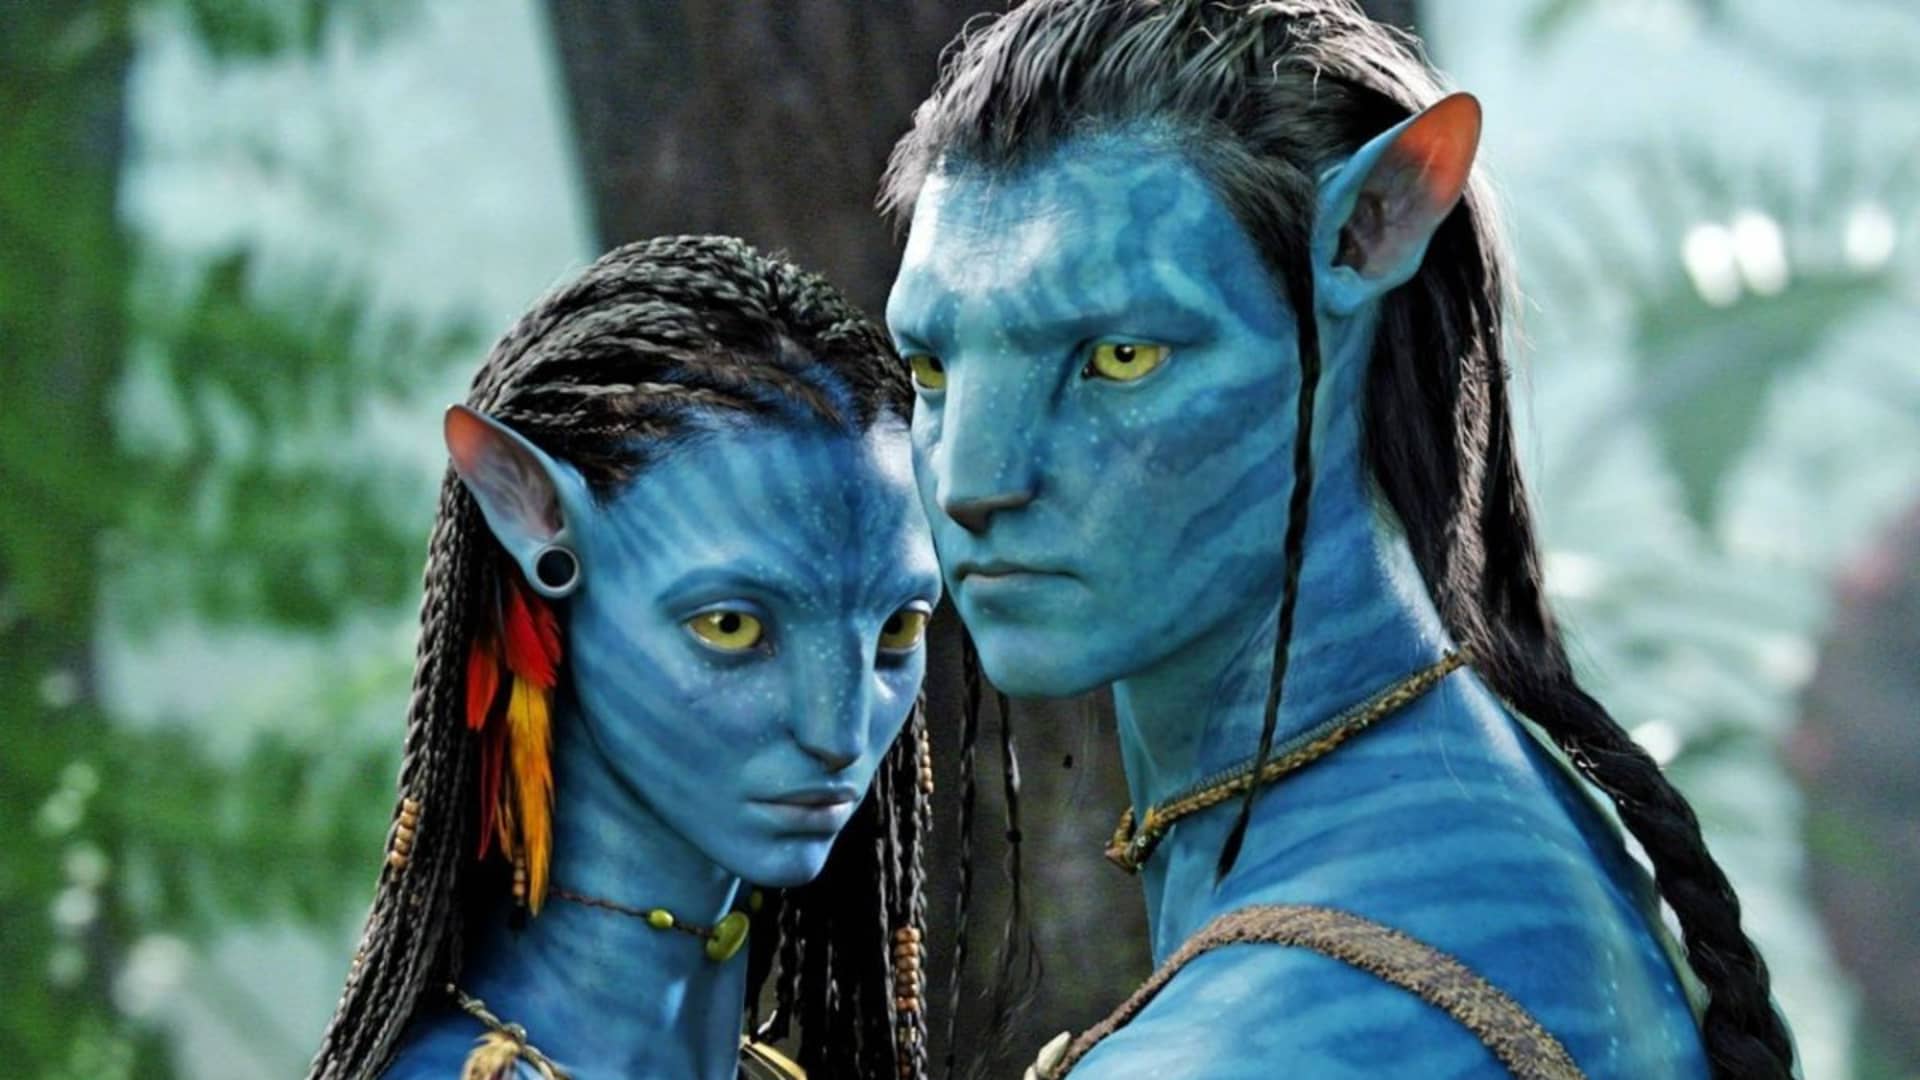 James Cameron's 'Avatar' sequels are a huge risk for Disney